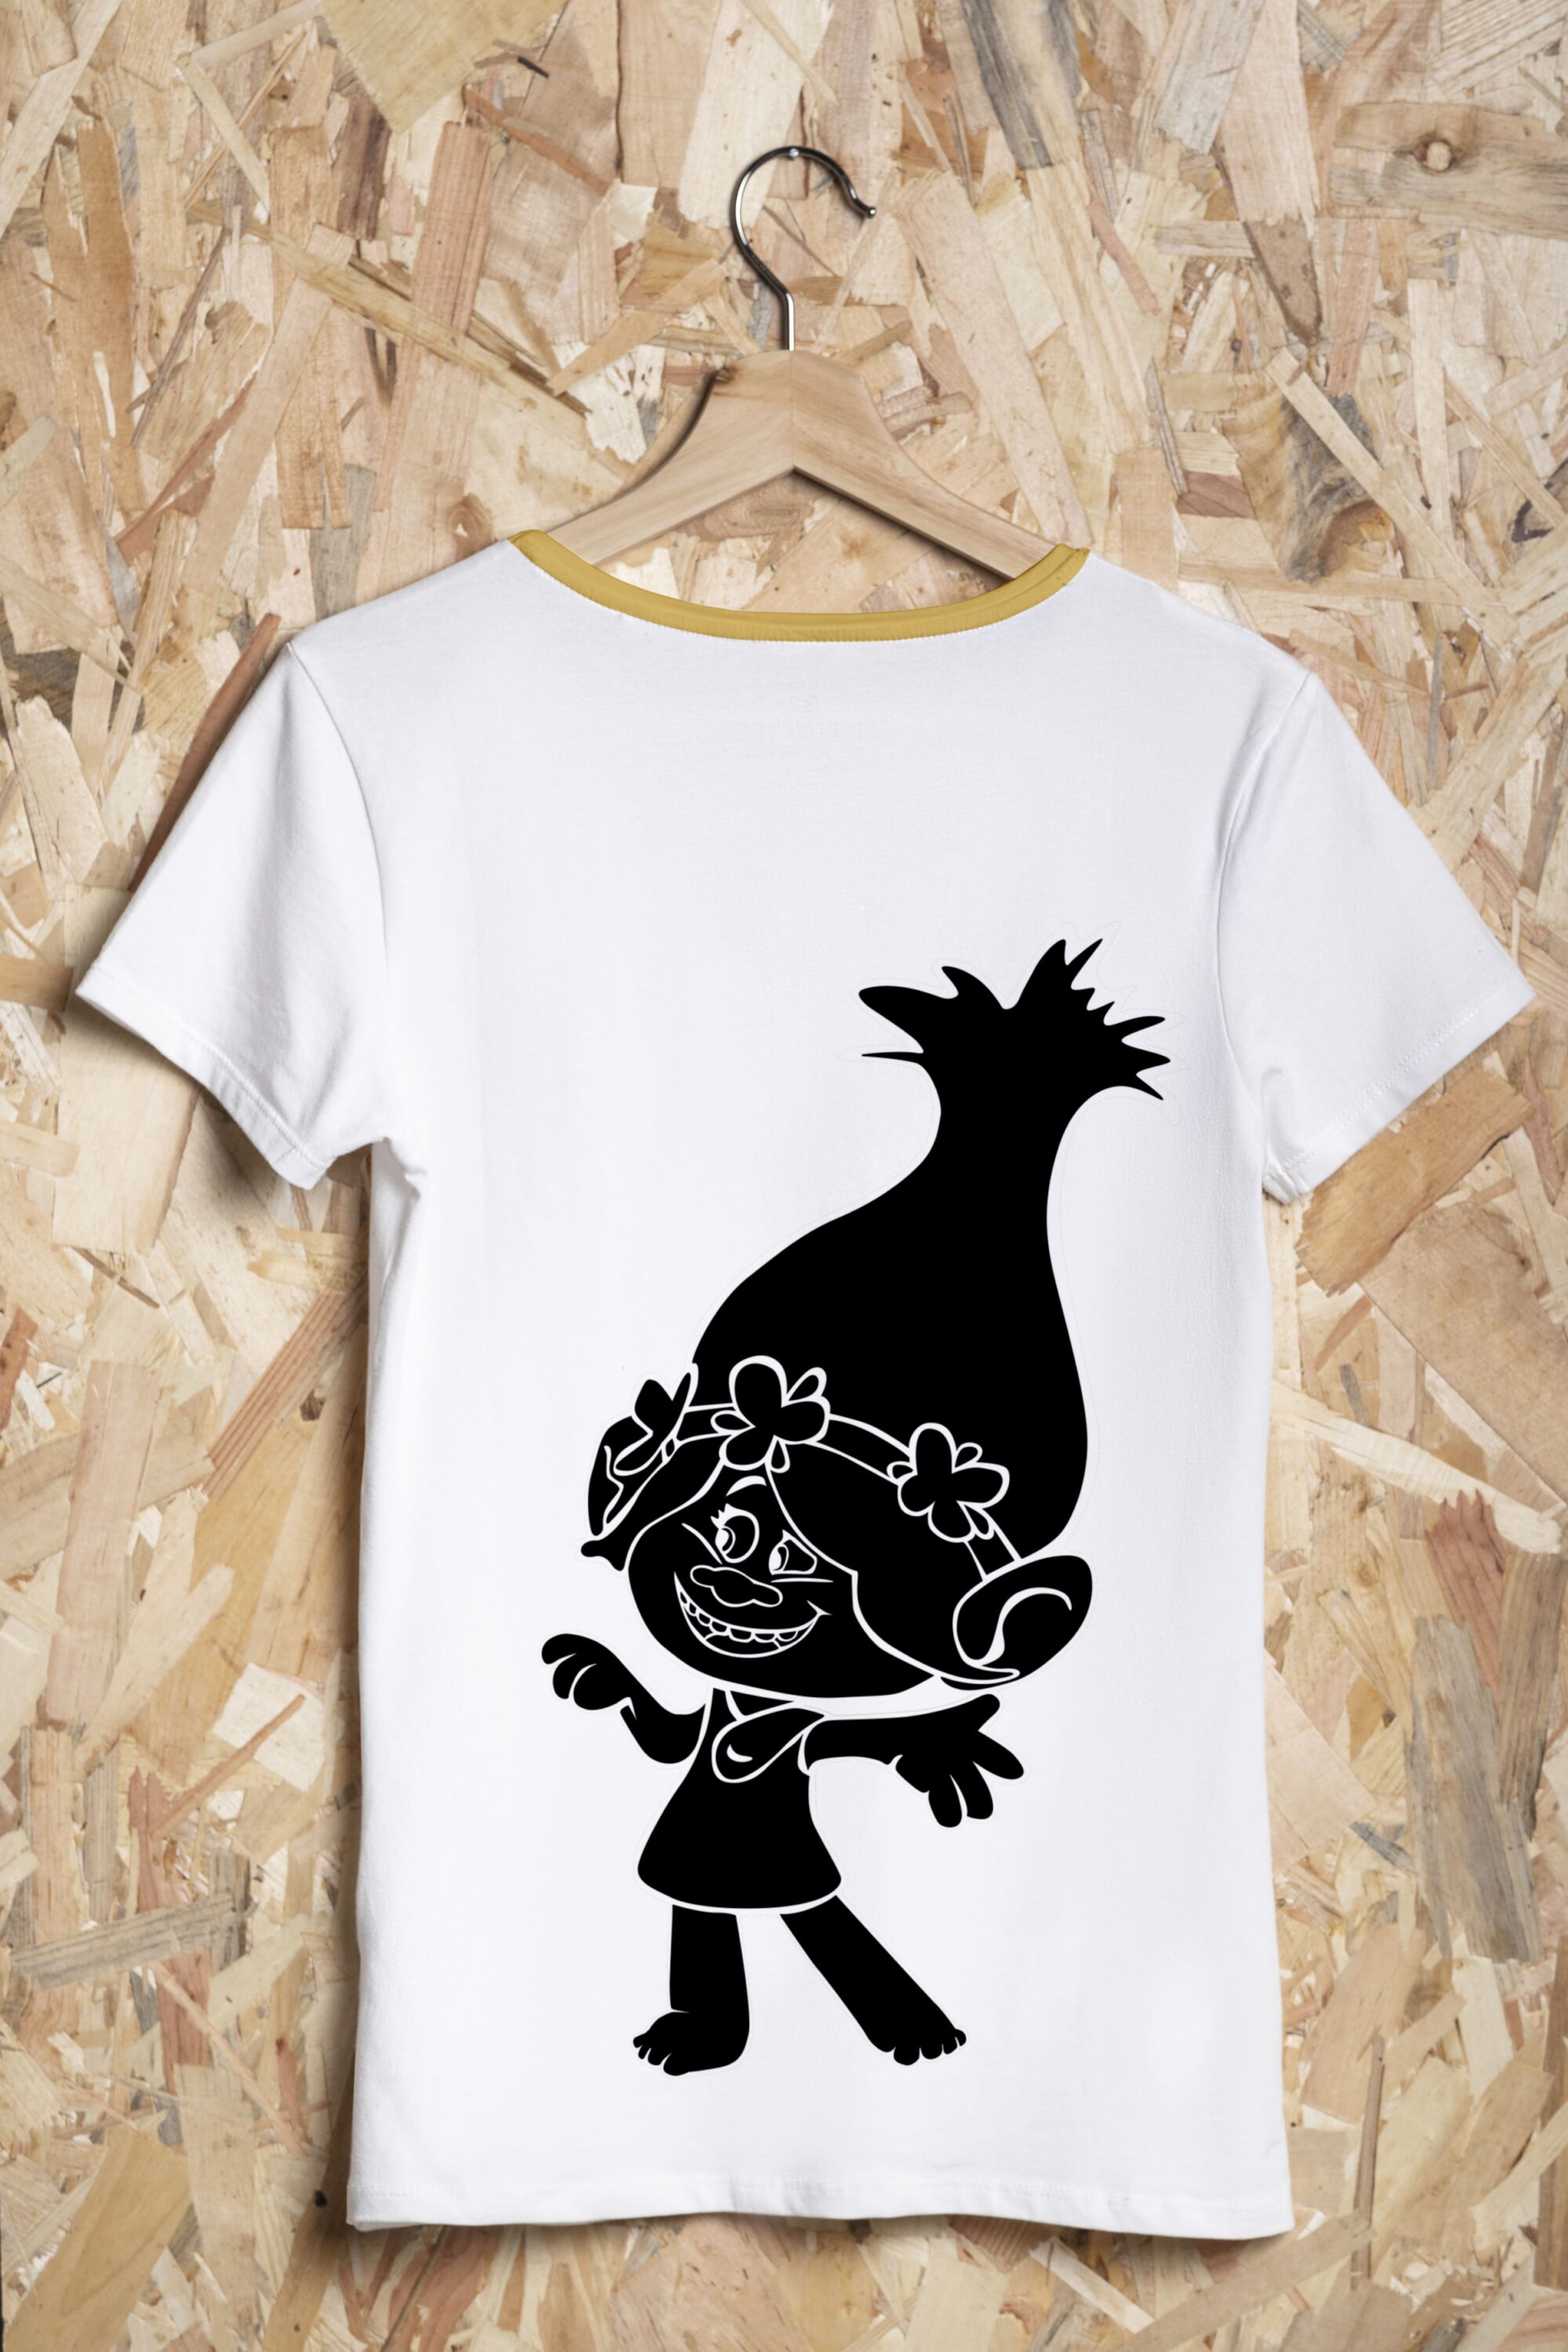 White T-shirt with dirty yellow collar and a monochrome image of a cartoon character - Poppy.